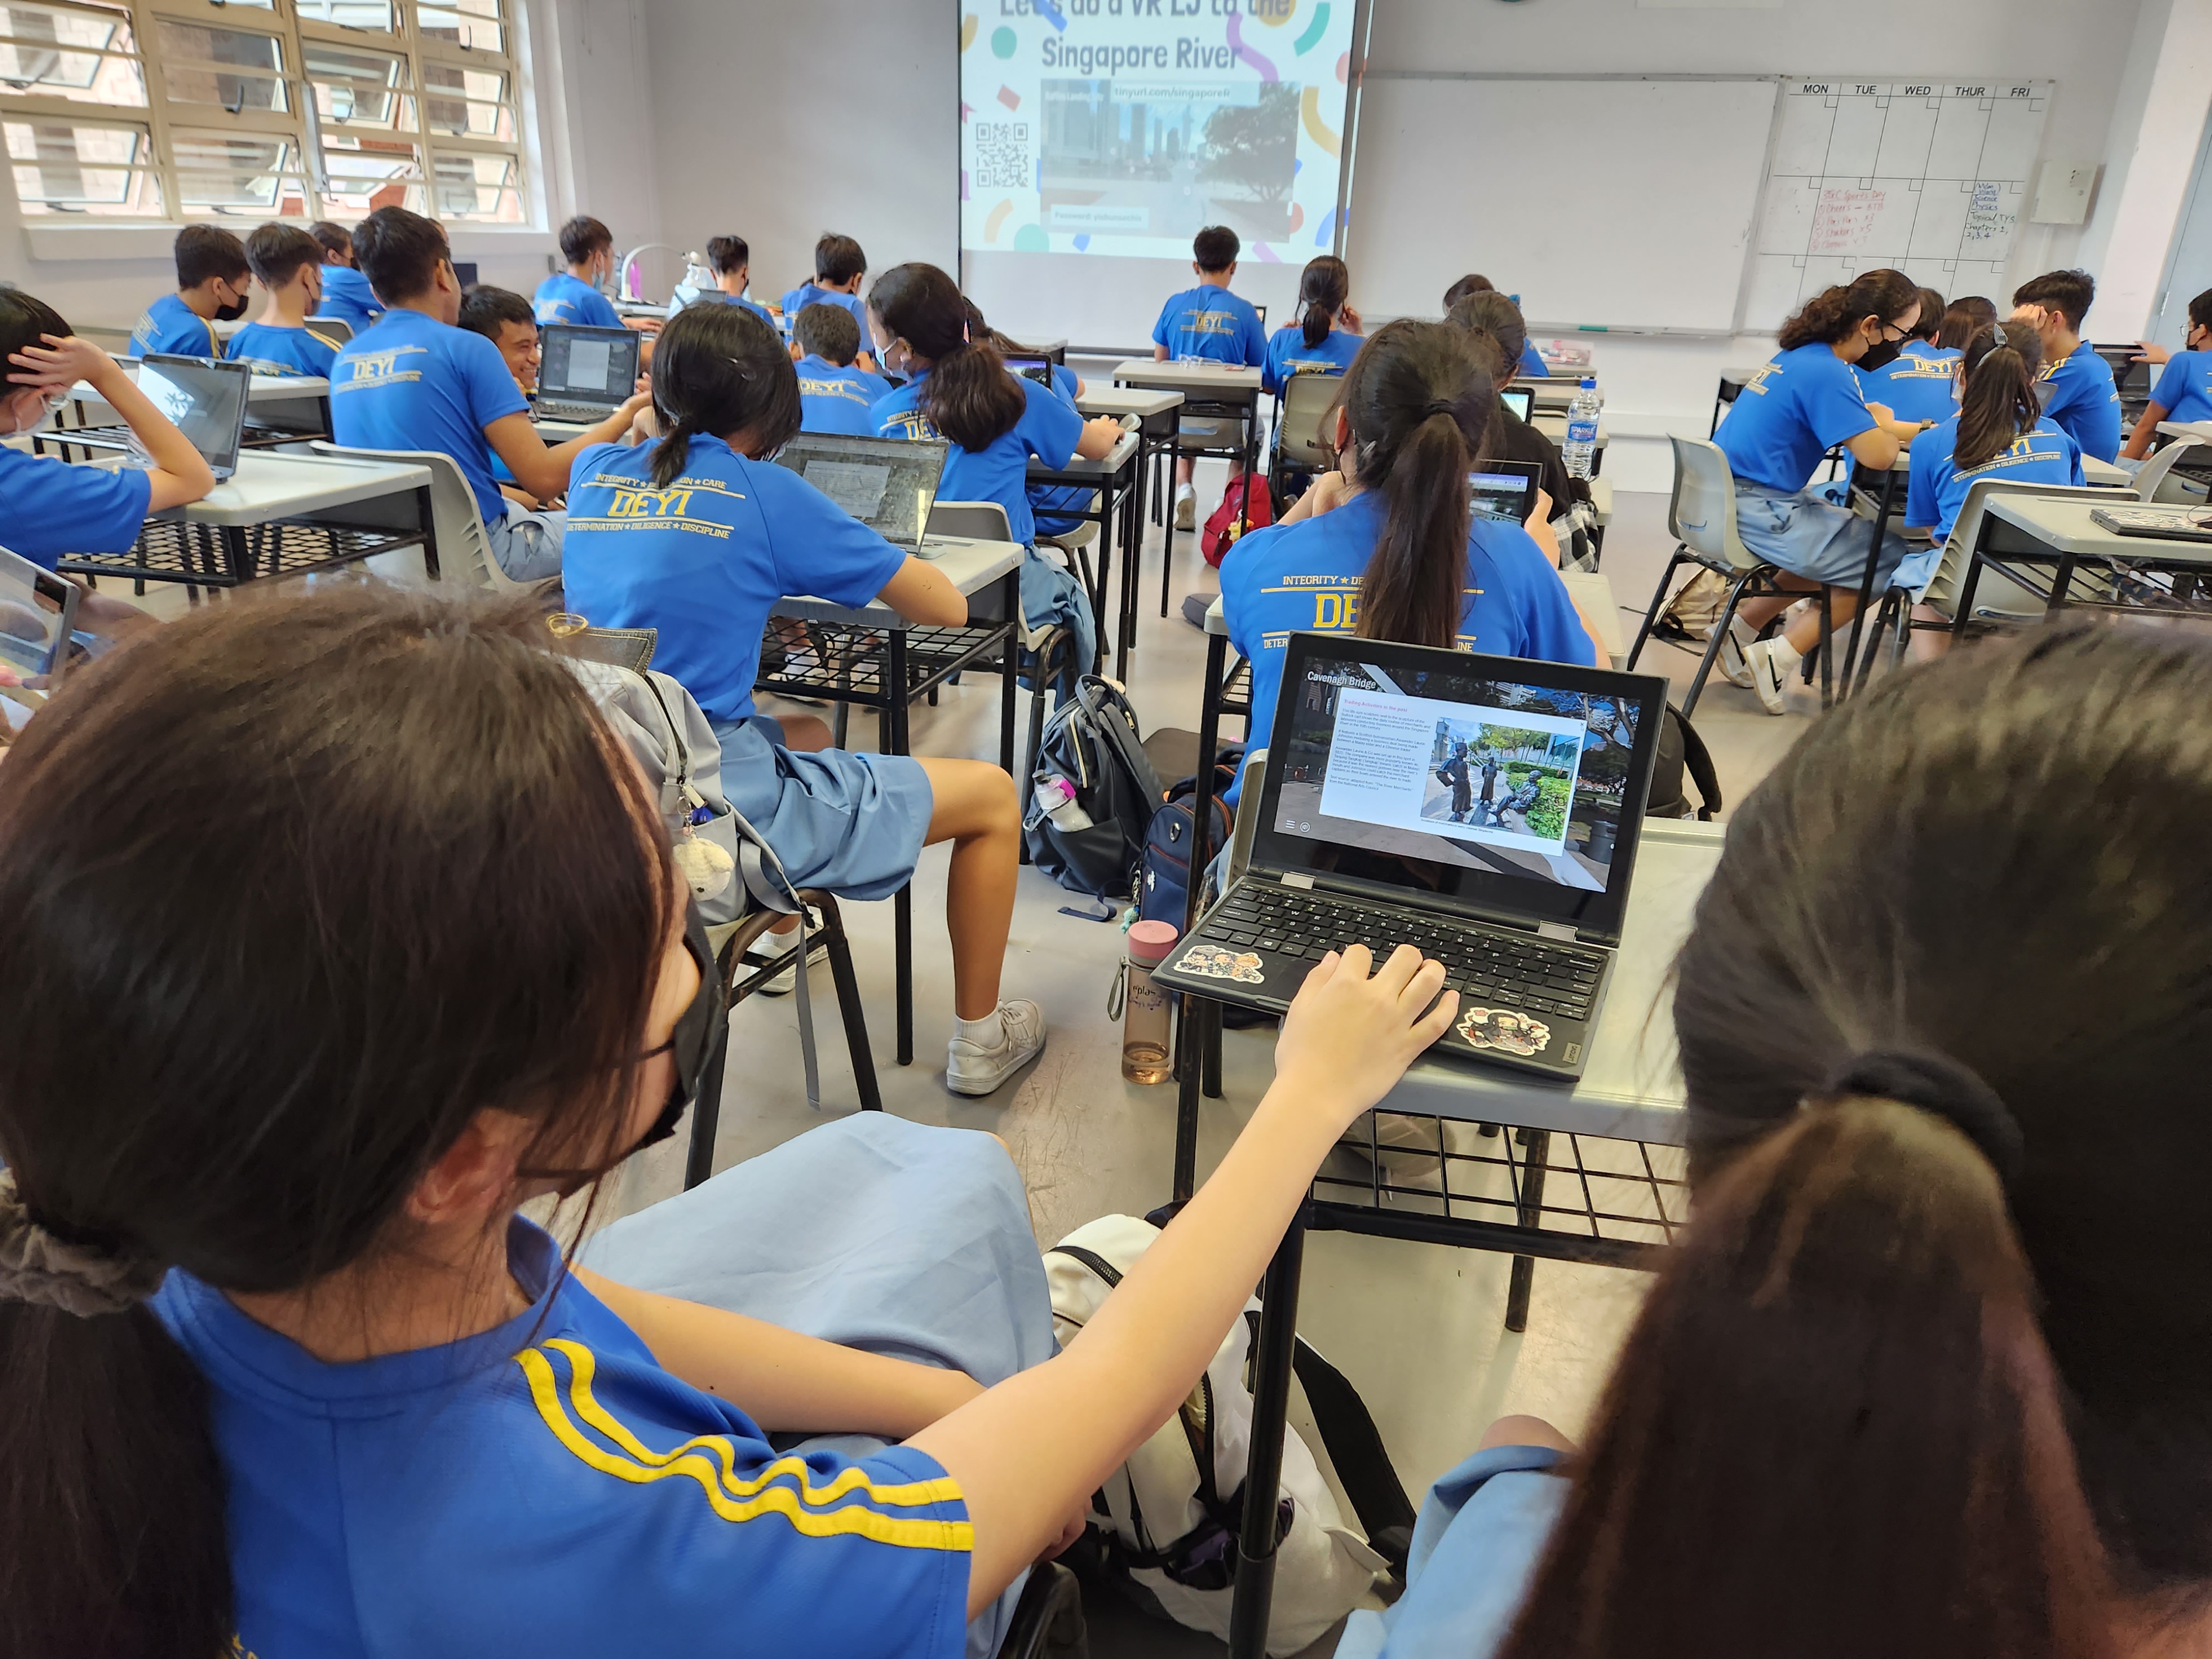 Going on the Virtual Fieldtrip to the Singapore River to know the history of Singapore better